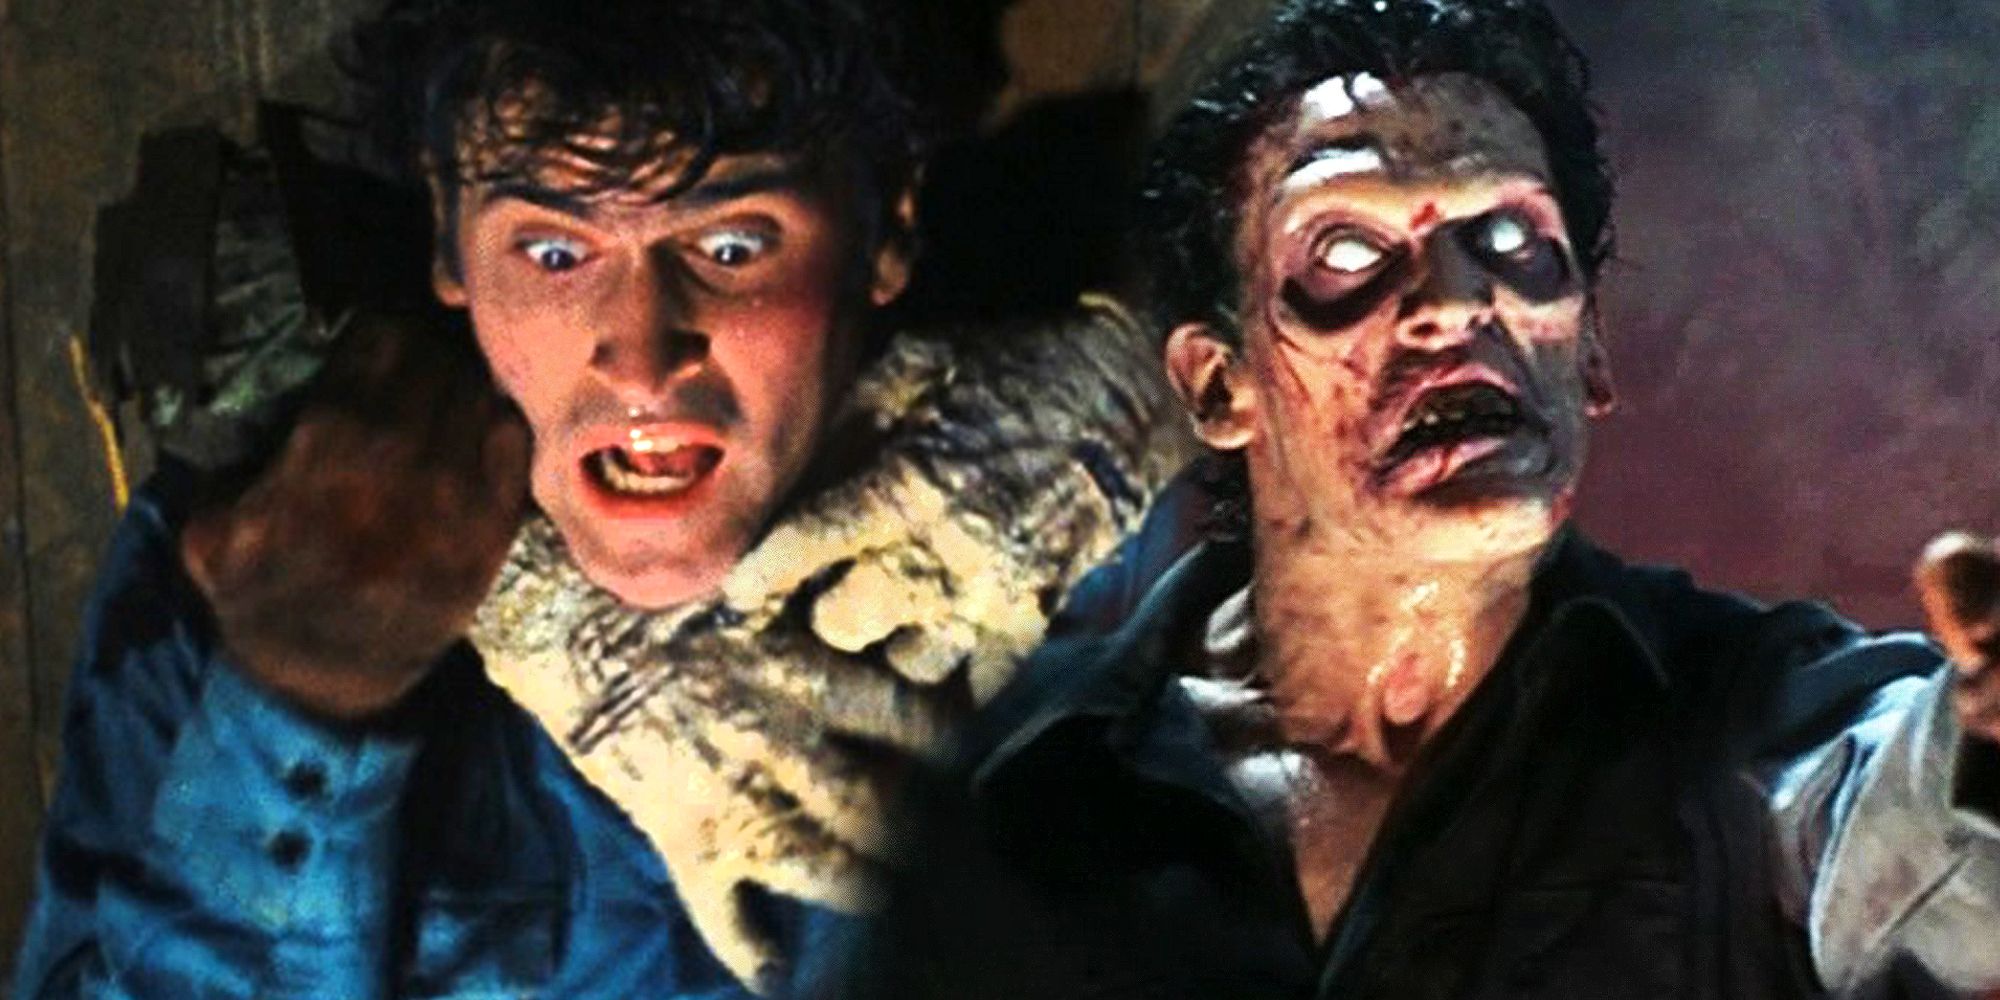 Bruce Campbell's Ash Williams in Evil Dead 1 & 2